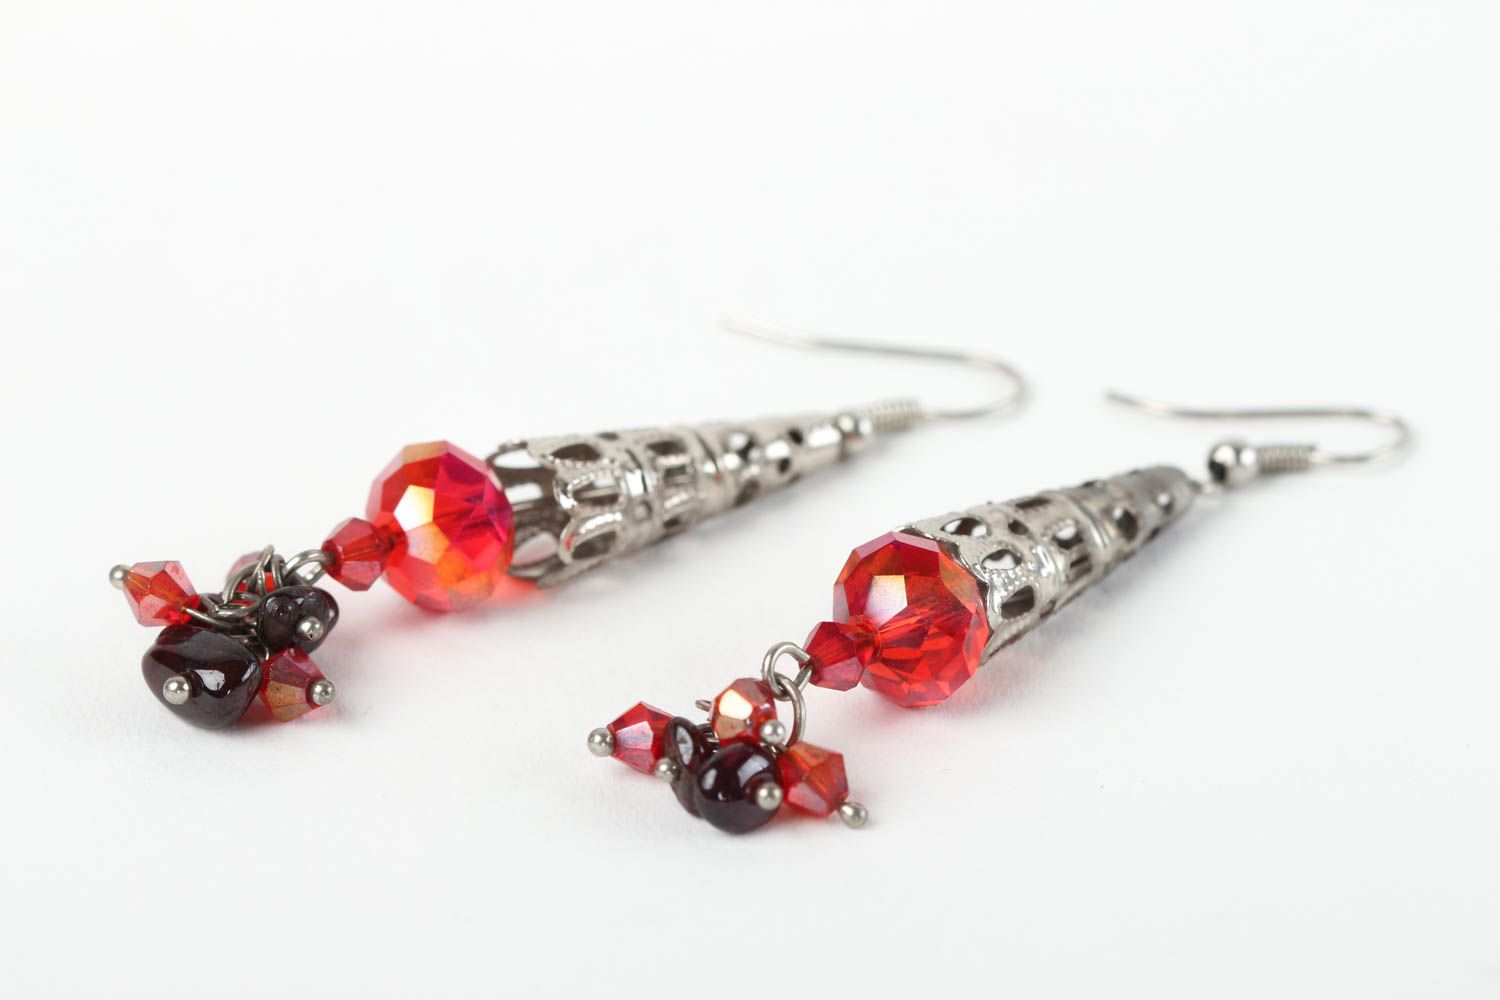 Stylish handmade beaded earrings metal earrings with natural stones small gifts photo 3